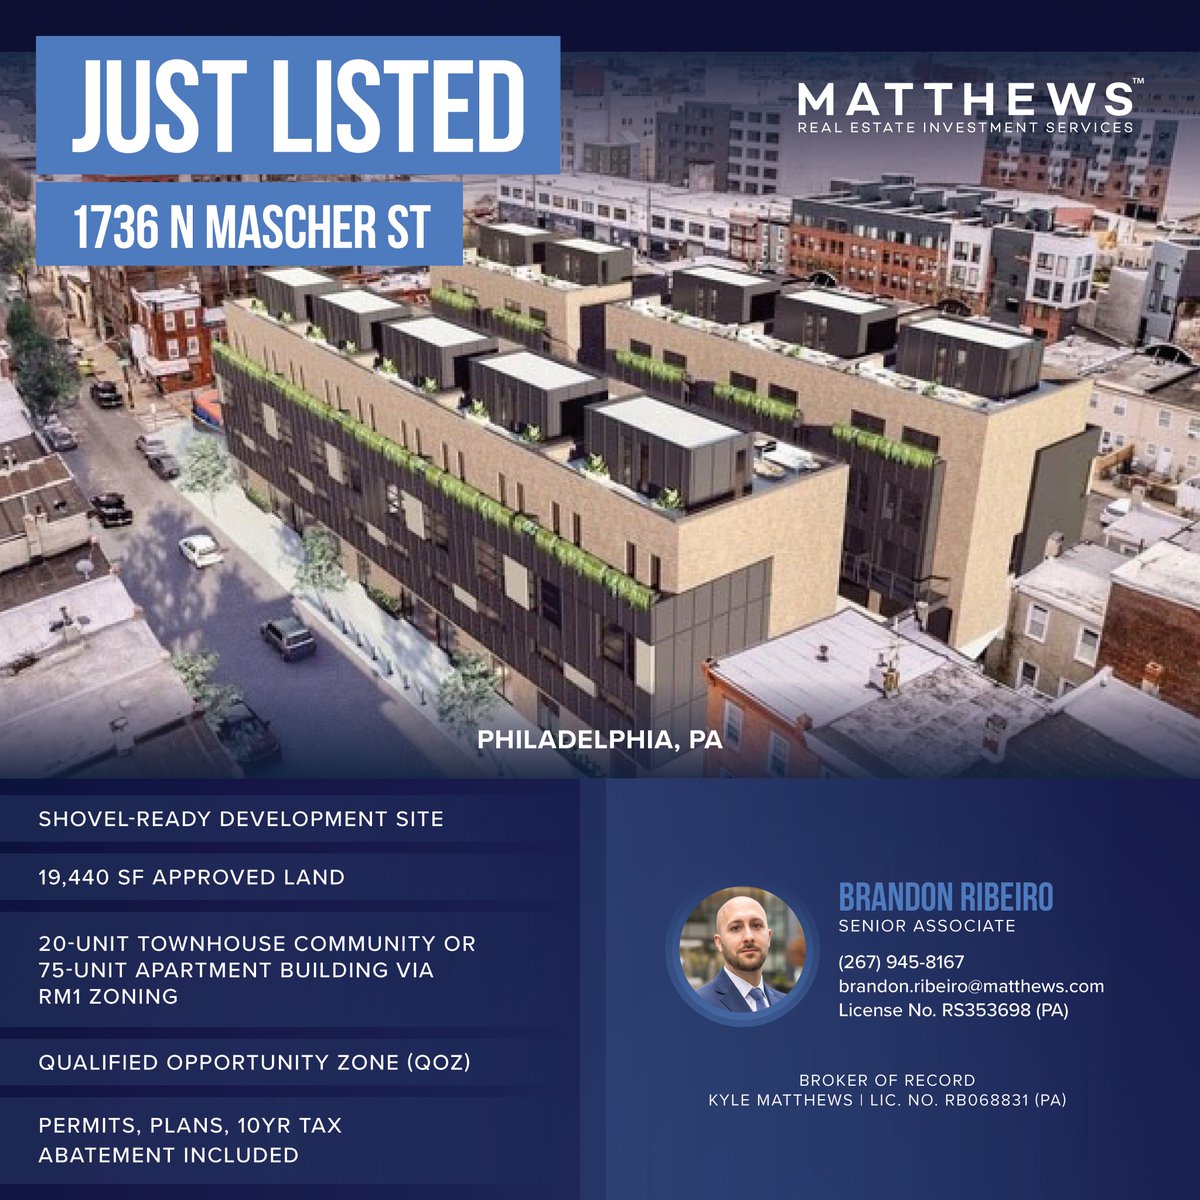 Shovel-ready development site | Just Listed! ⭐️ For more information, please contact Brandon Ribeiro 📲 #Matthews #CRE #RealEstate #JustListed #Multifamily #PhiladelphiaRealEstate